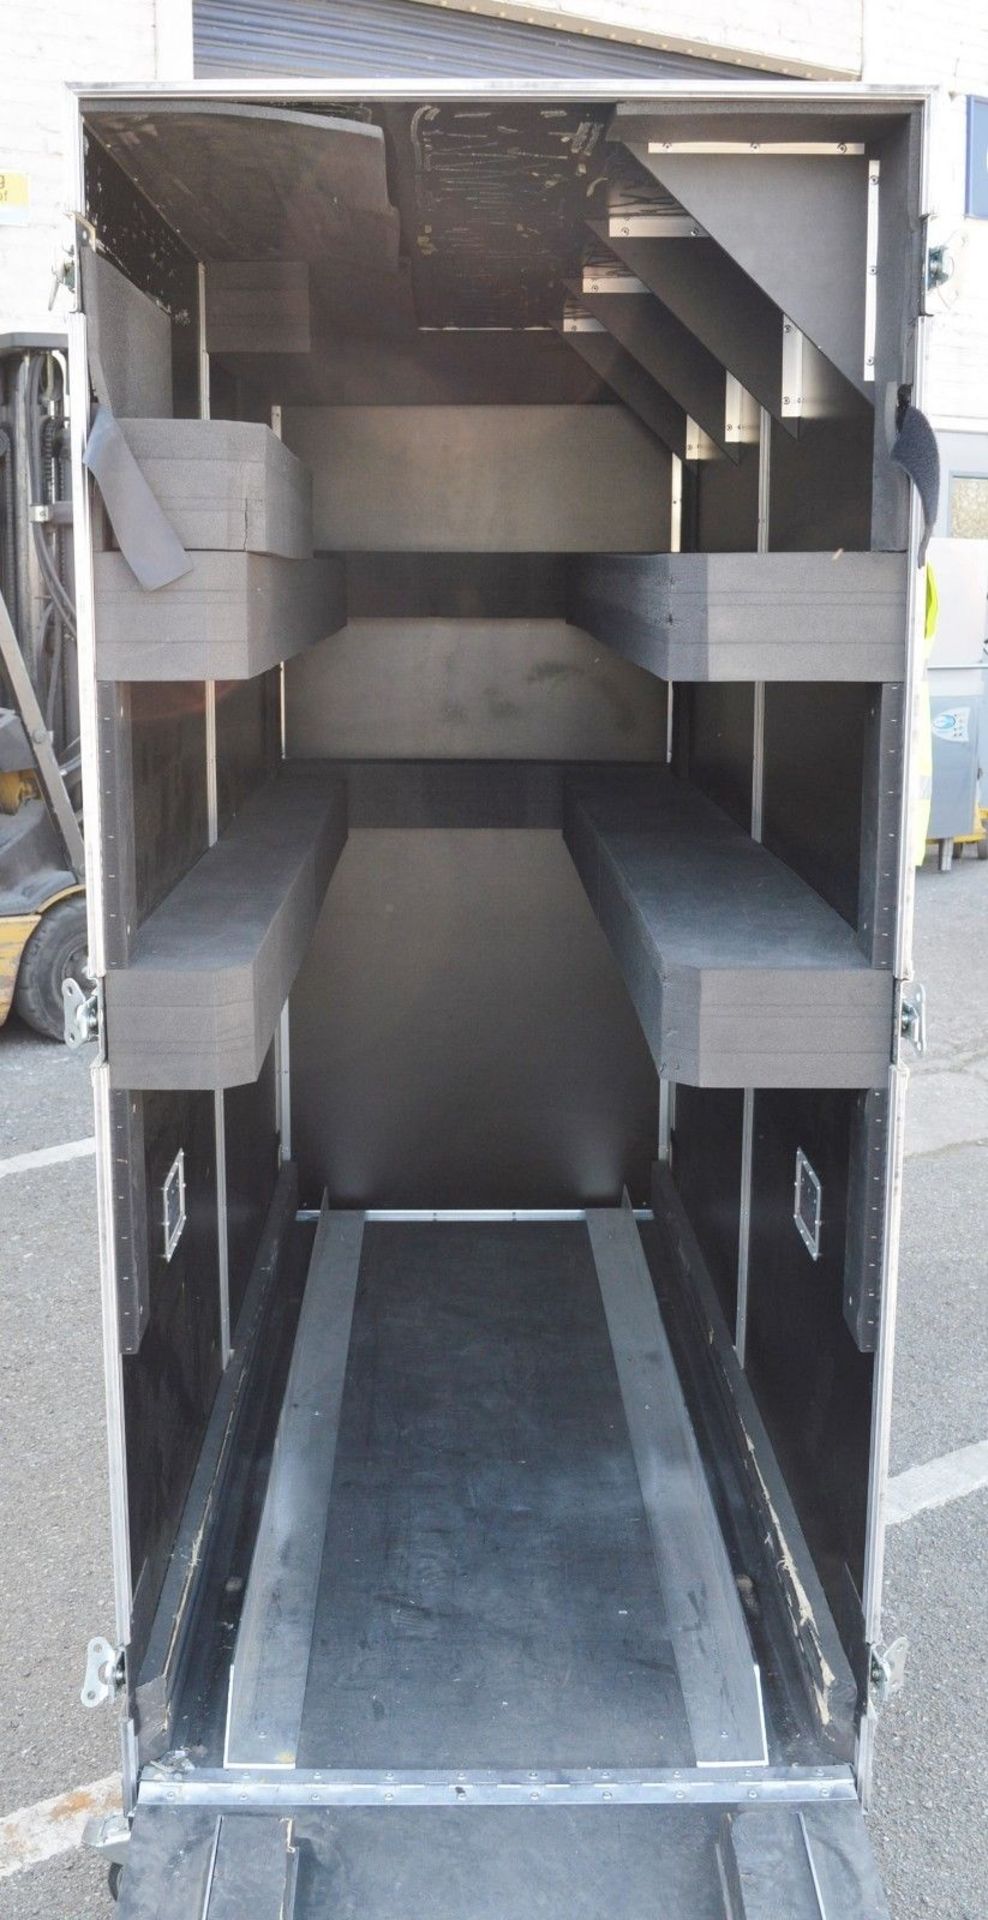 1 x Large Flight Case With Castors and Ramp For Easy Loading - H188 x W200 x D79 cms - CL011 - - Image 6 of 11